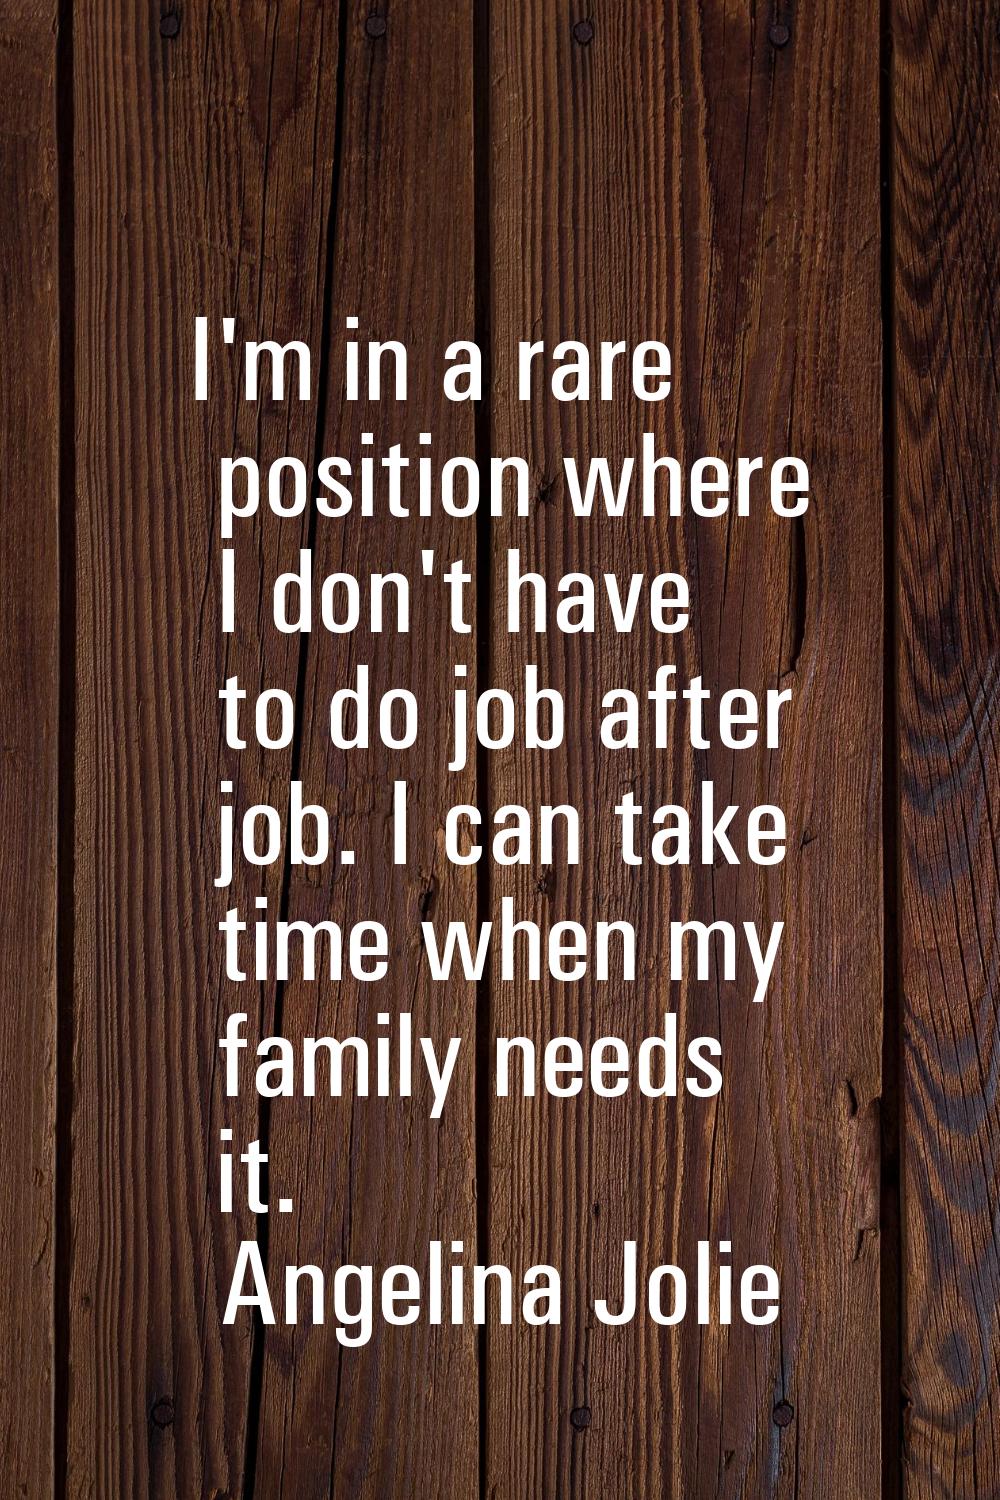 I'm in a rare position where I don't have to do job after job. I can take time when my family needs